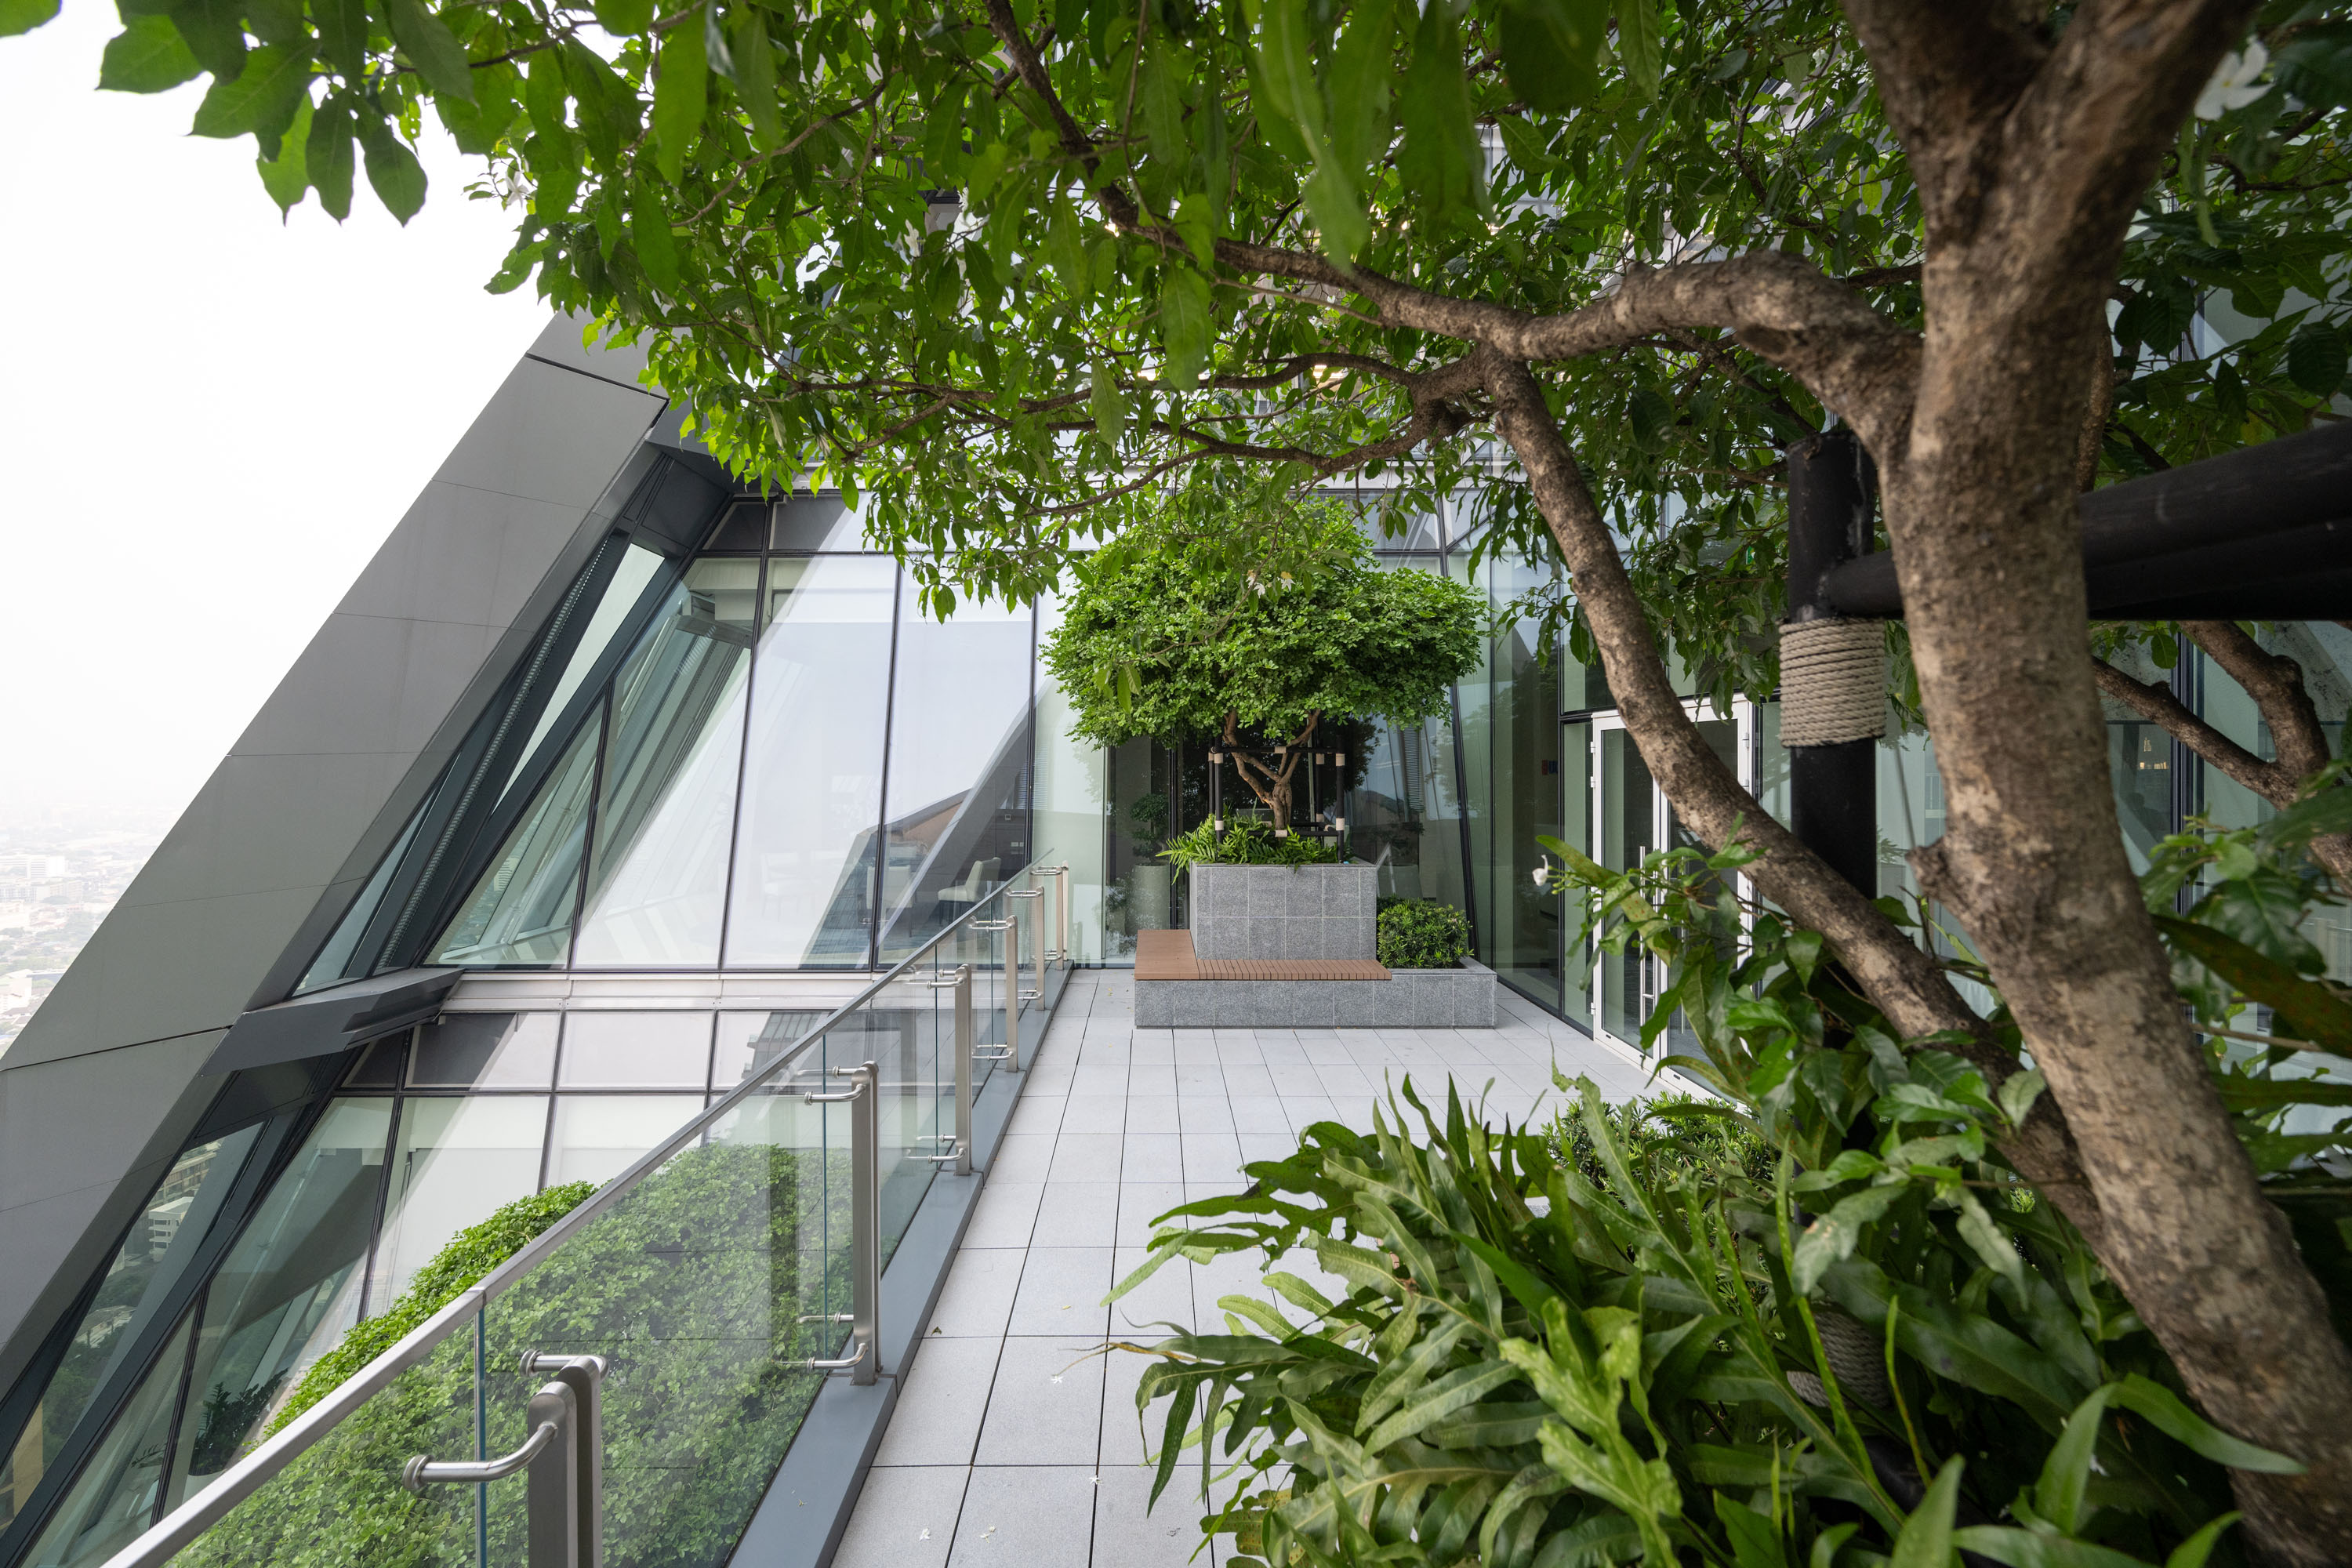 Sky Terraces bring nature closer to the work place